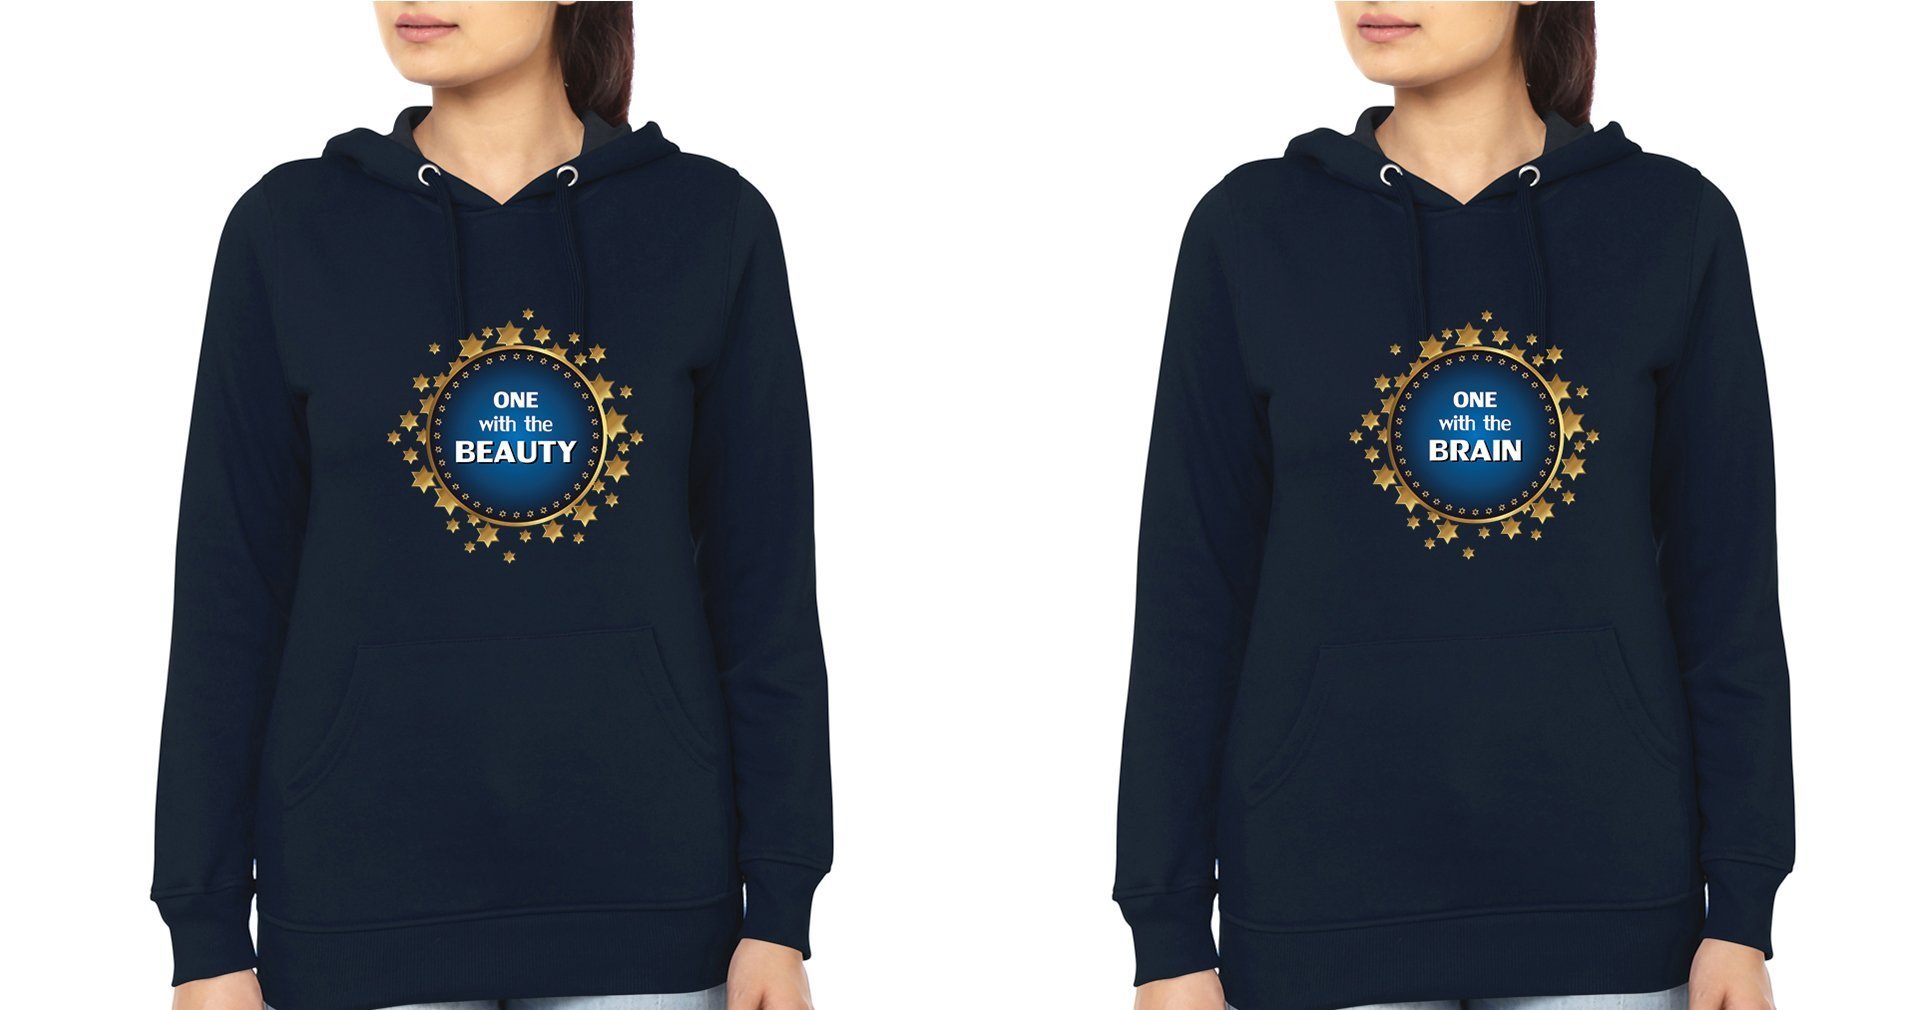 Beauty & Brain Sister Sister Hoodies-FunkyTradition - FunkyTradition